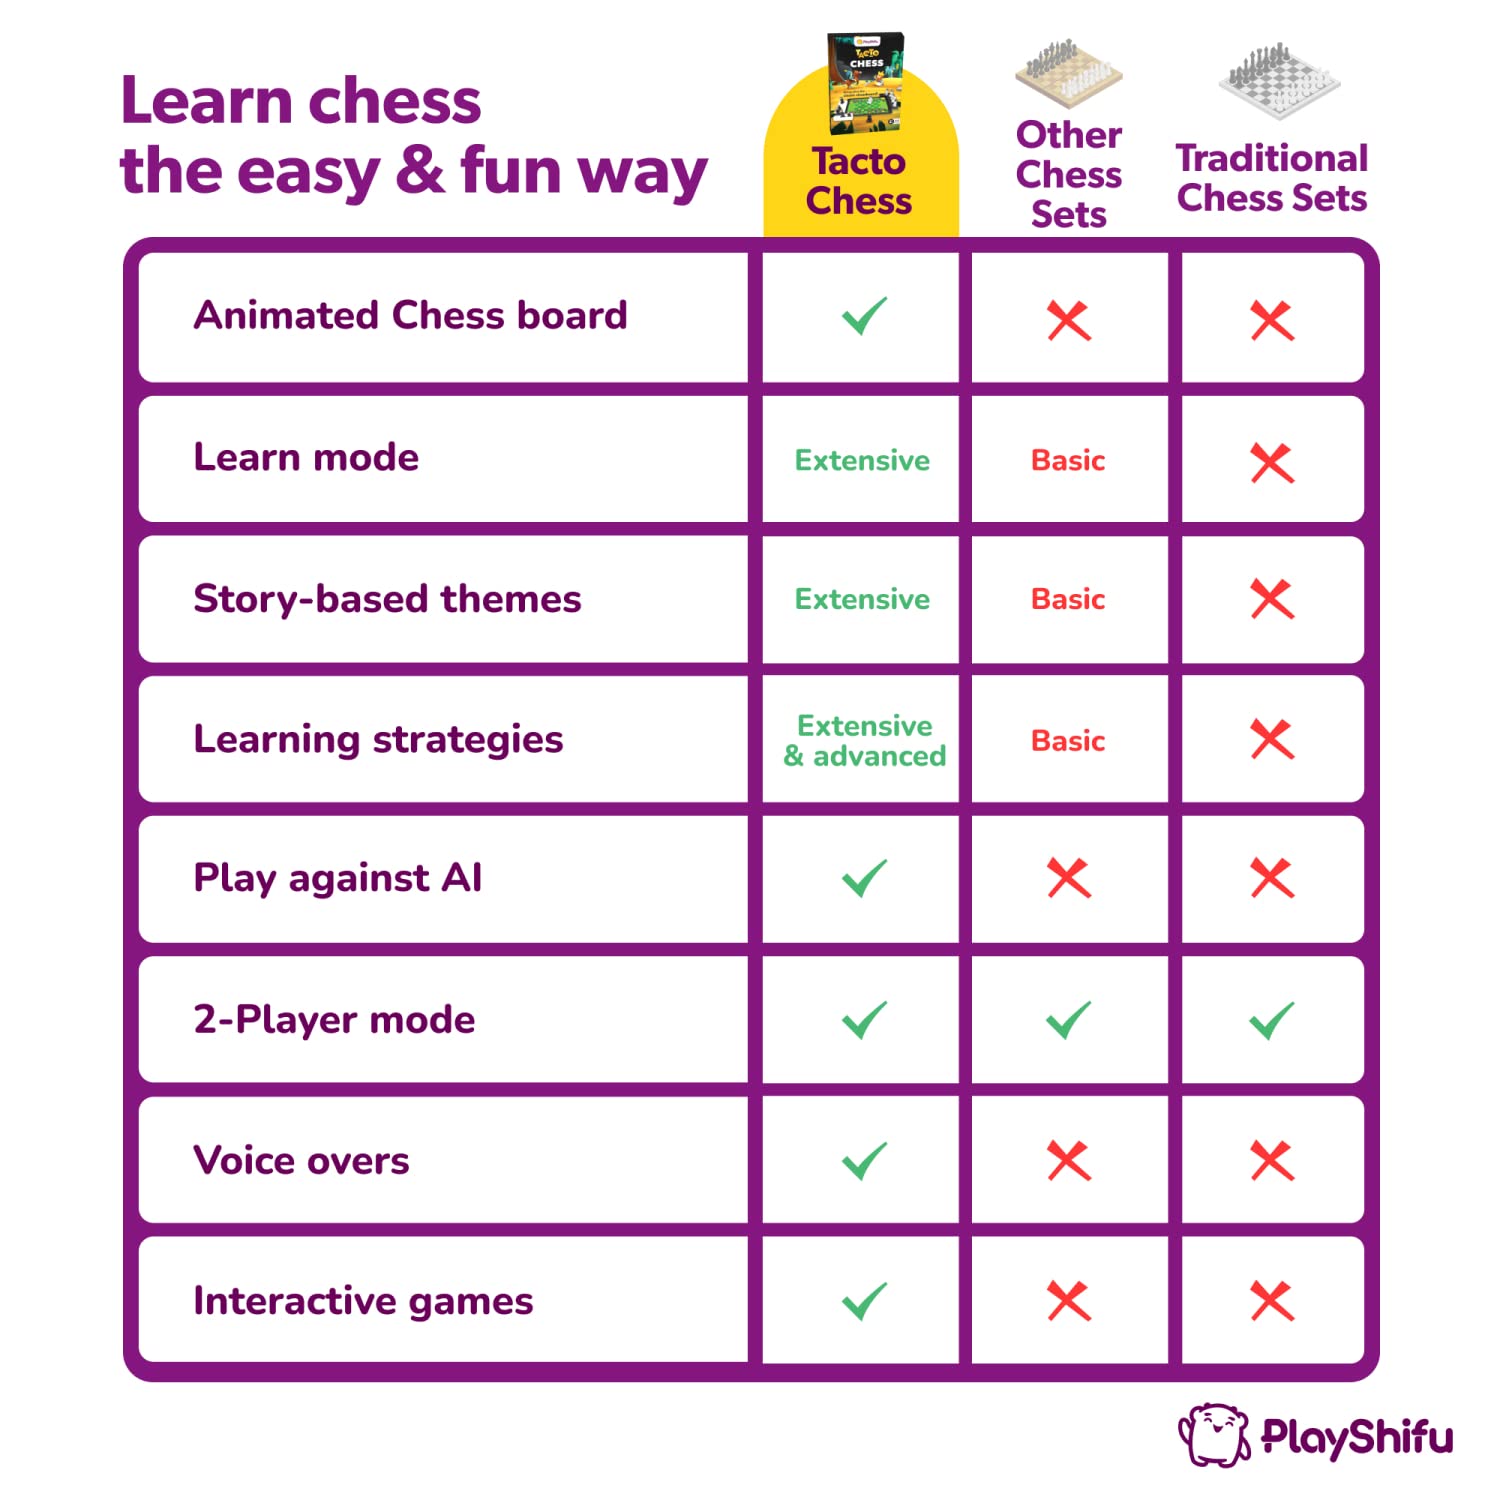 Tacto Chess by PlayShifu (App Based) - Real Figurines, Digital Games | Interactive Story-Based Chess Game Set | Brain Games | Educational Gifts for Boys and Girls Ages 6 & up (Tablet not Included)